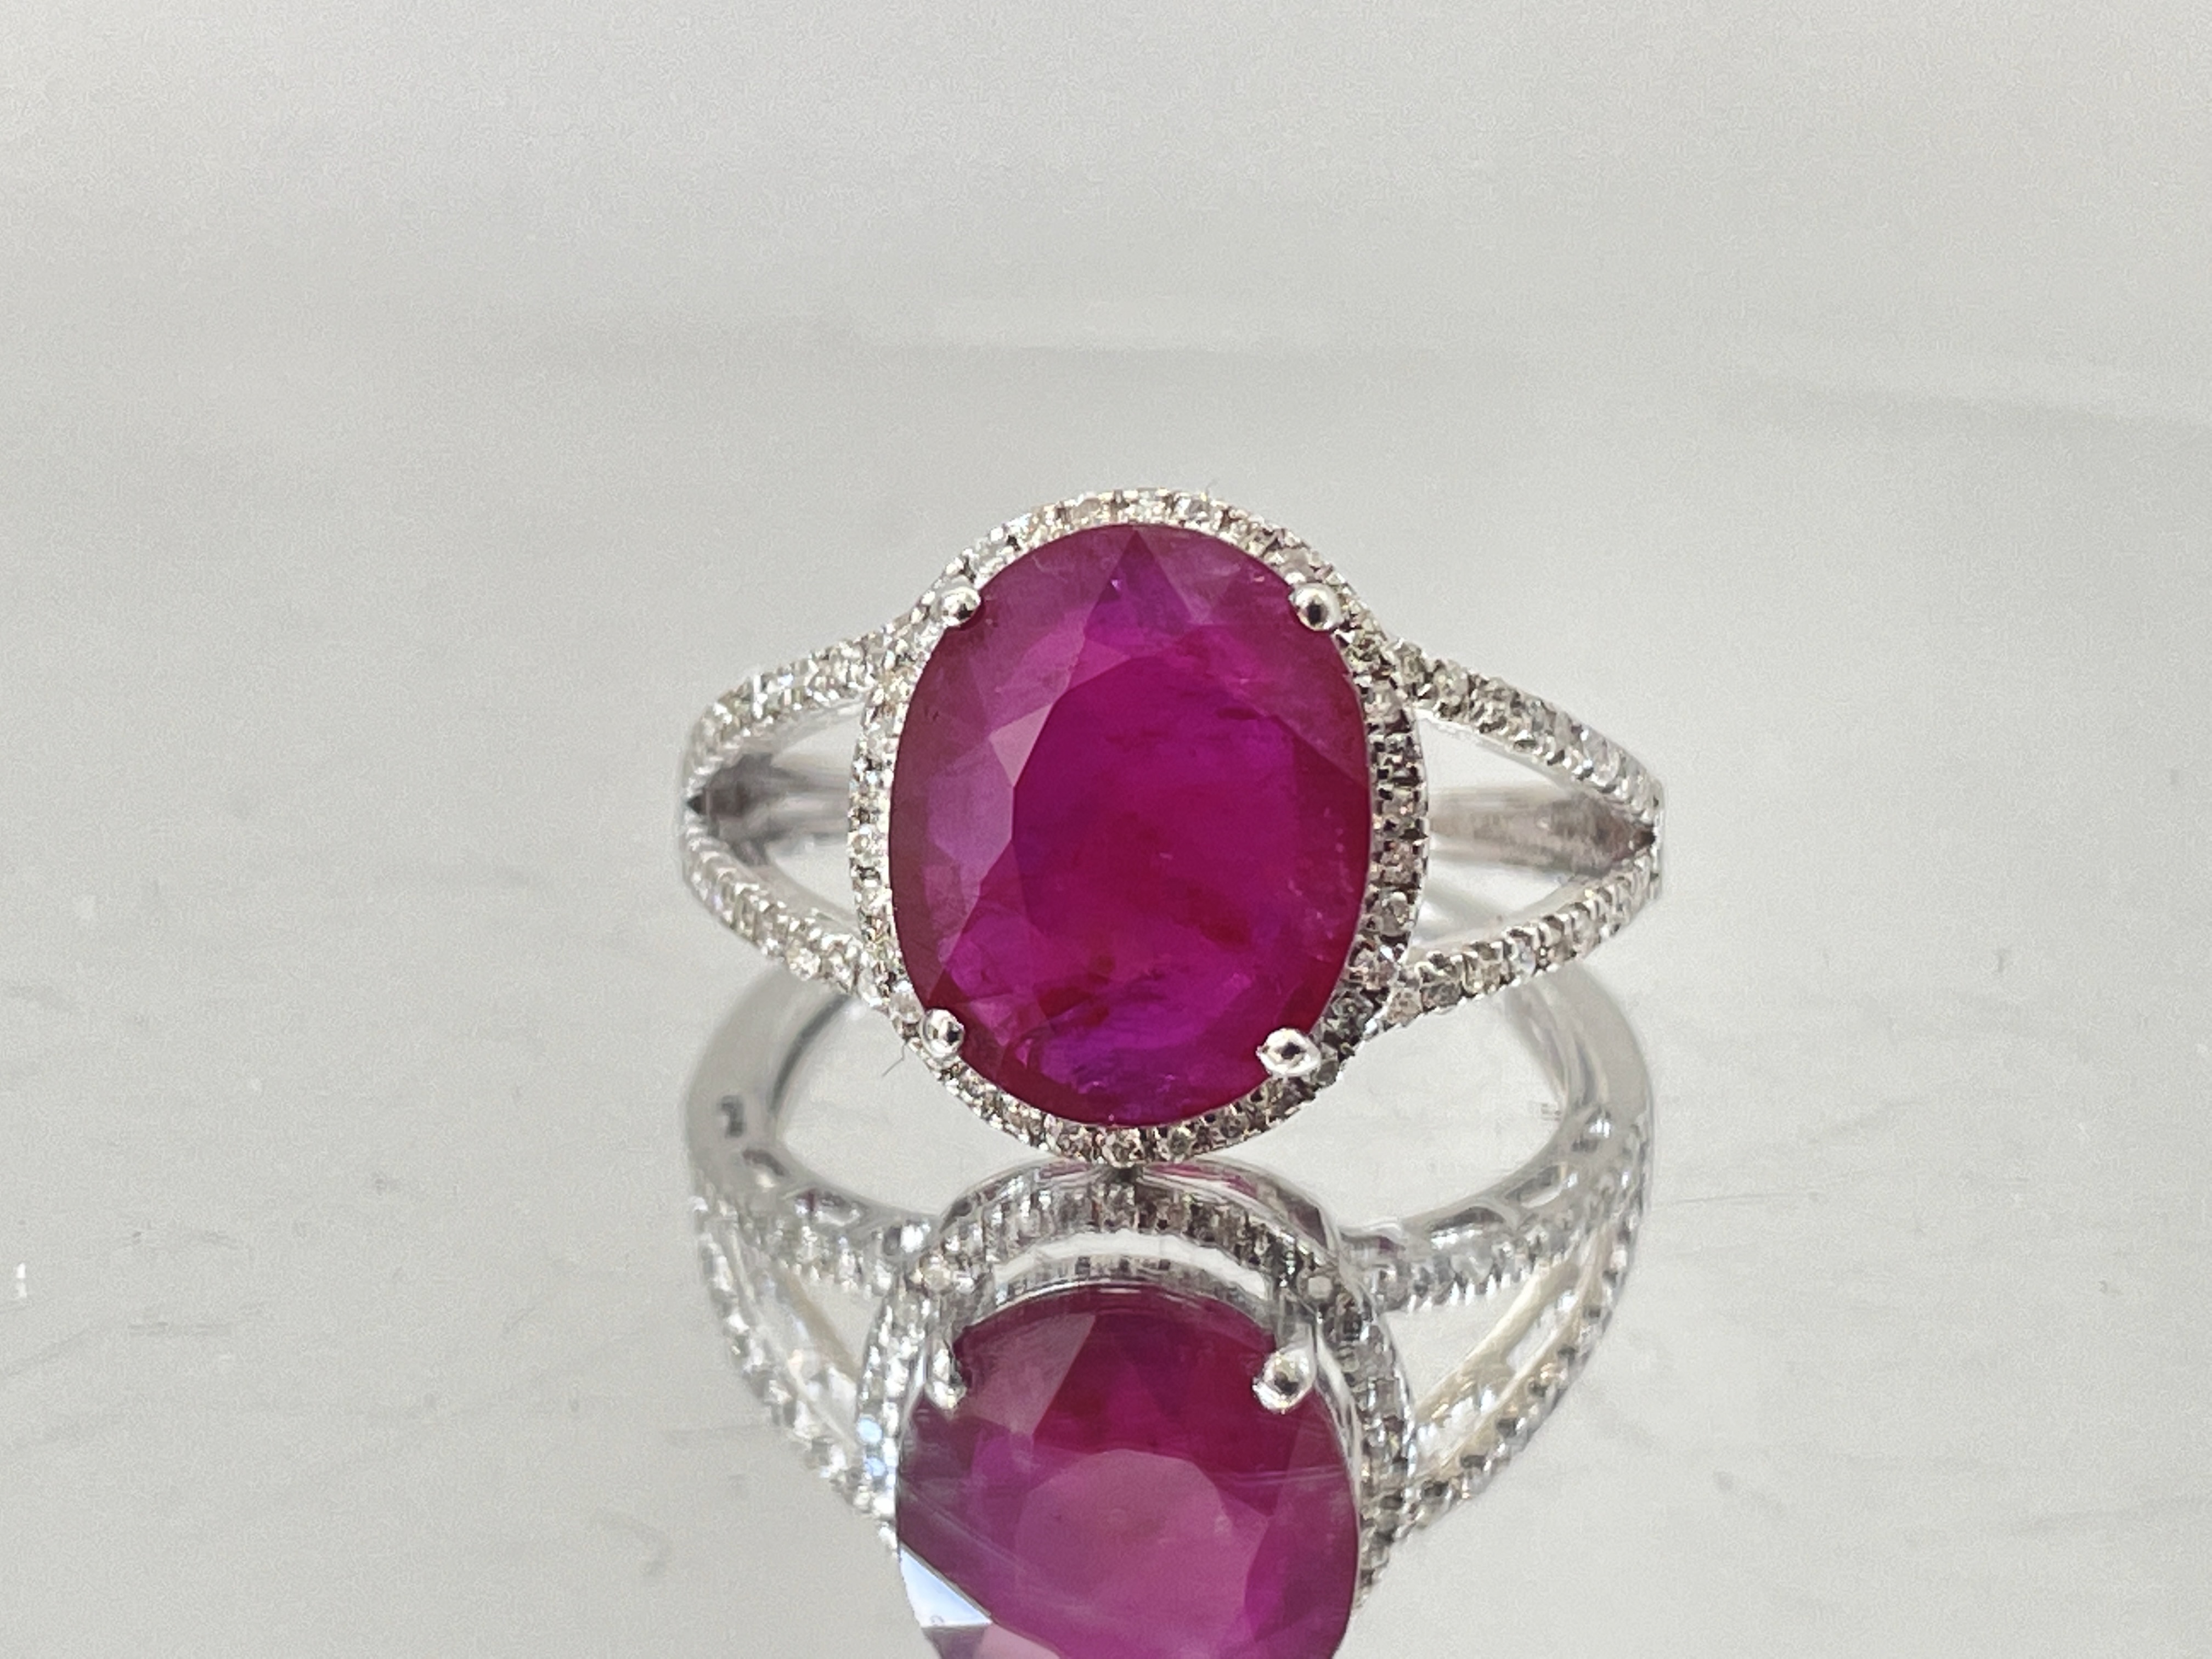 Natural Burma Ruby 3.77Ct With Natural Diamonds & 18kGold - Image 2 of 6